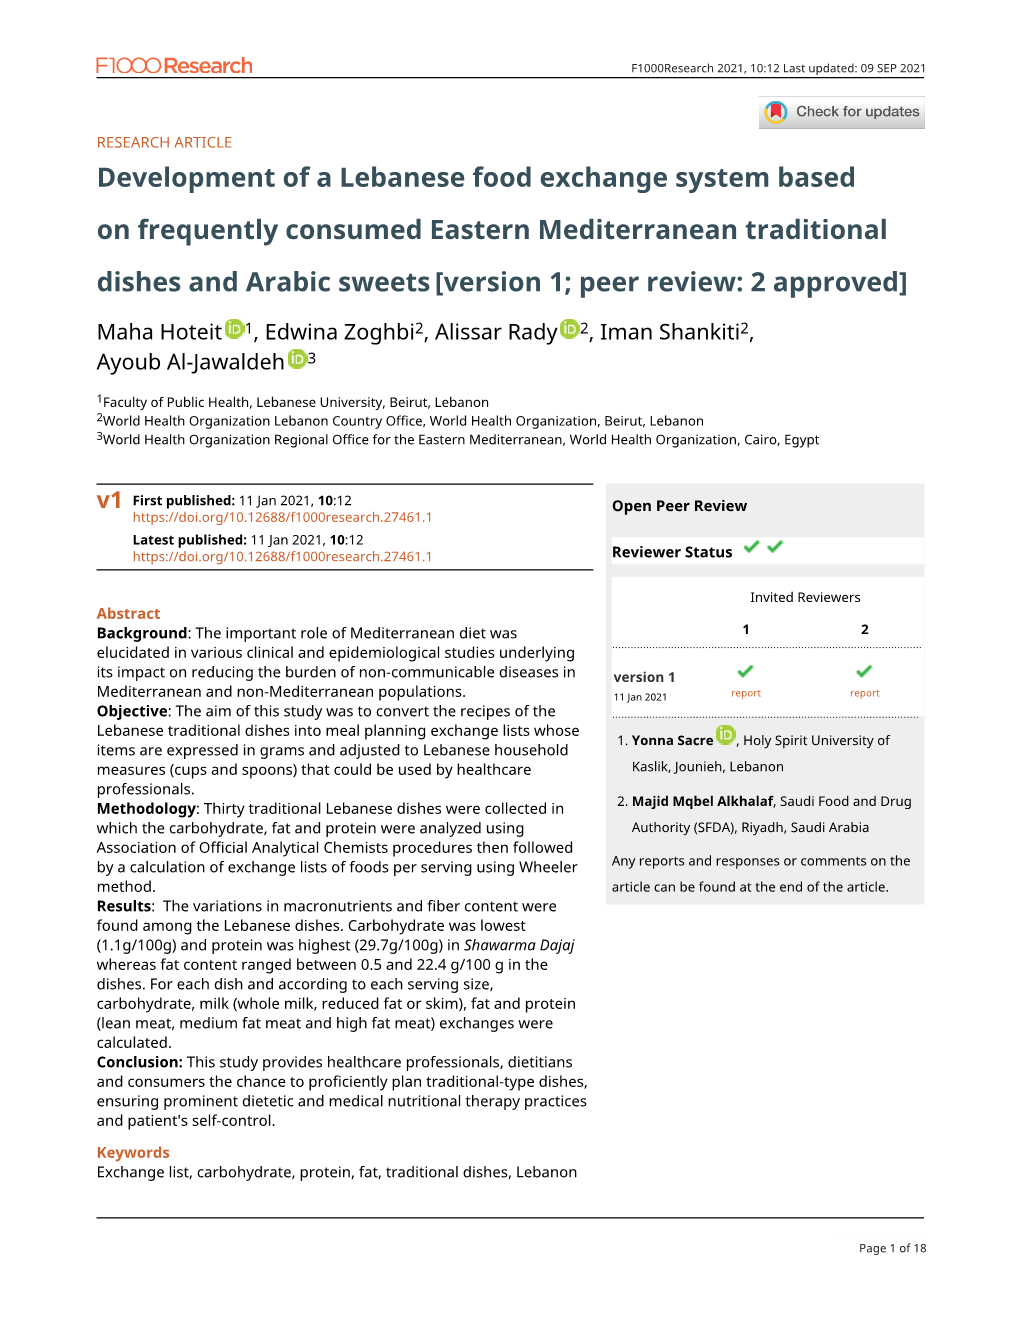 Development of a Lebanese Food Exchange System Based On